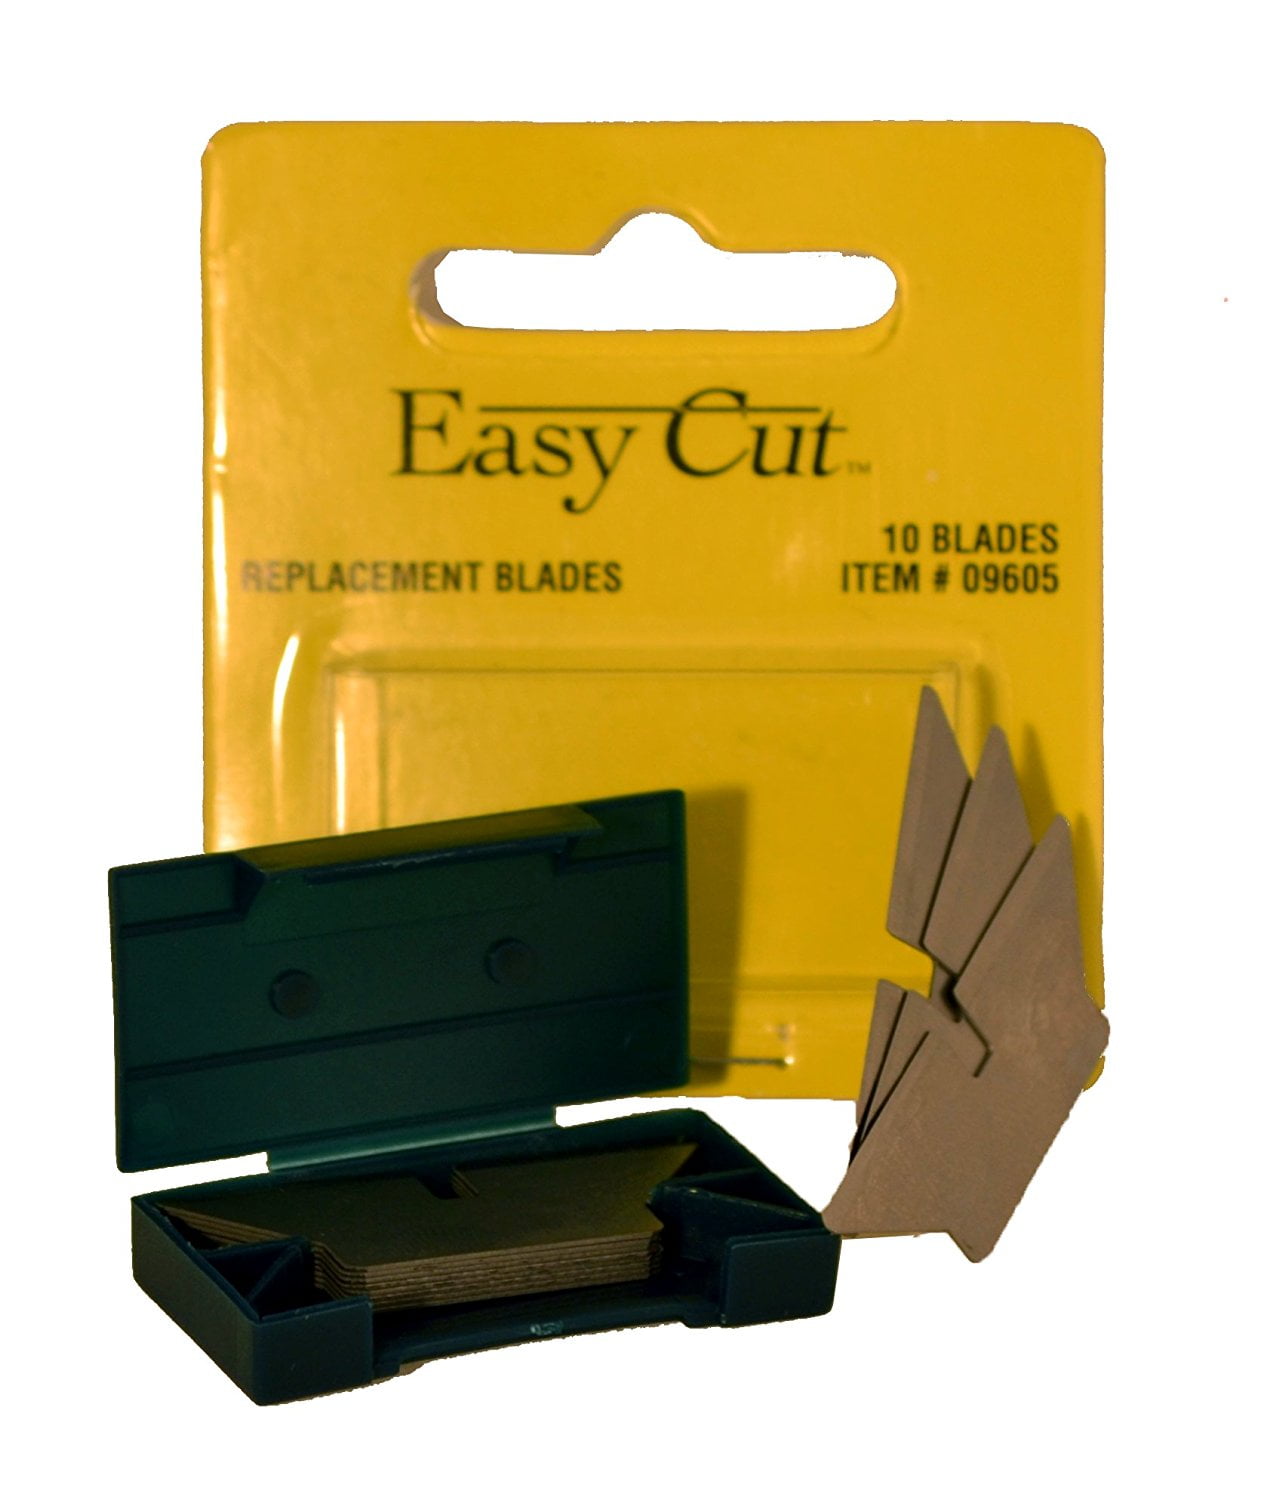 Easycut Self Retracting Cutter Replacement Blades 10/Pack Genuine Easy Cut NEW 